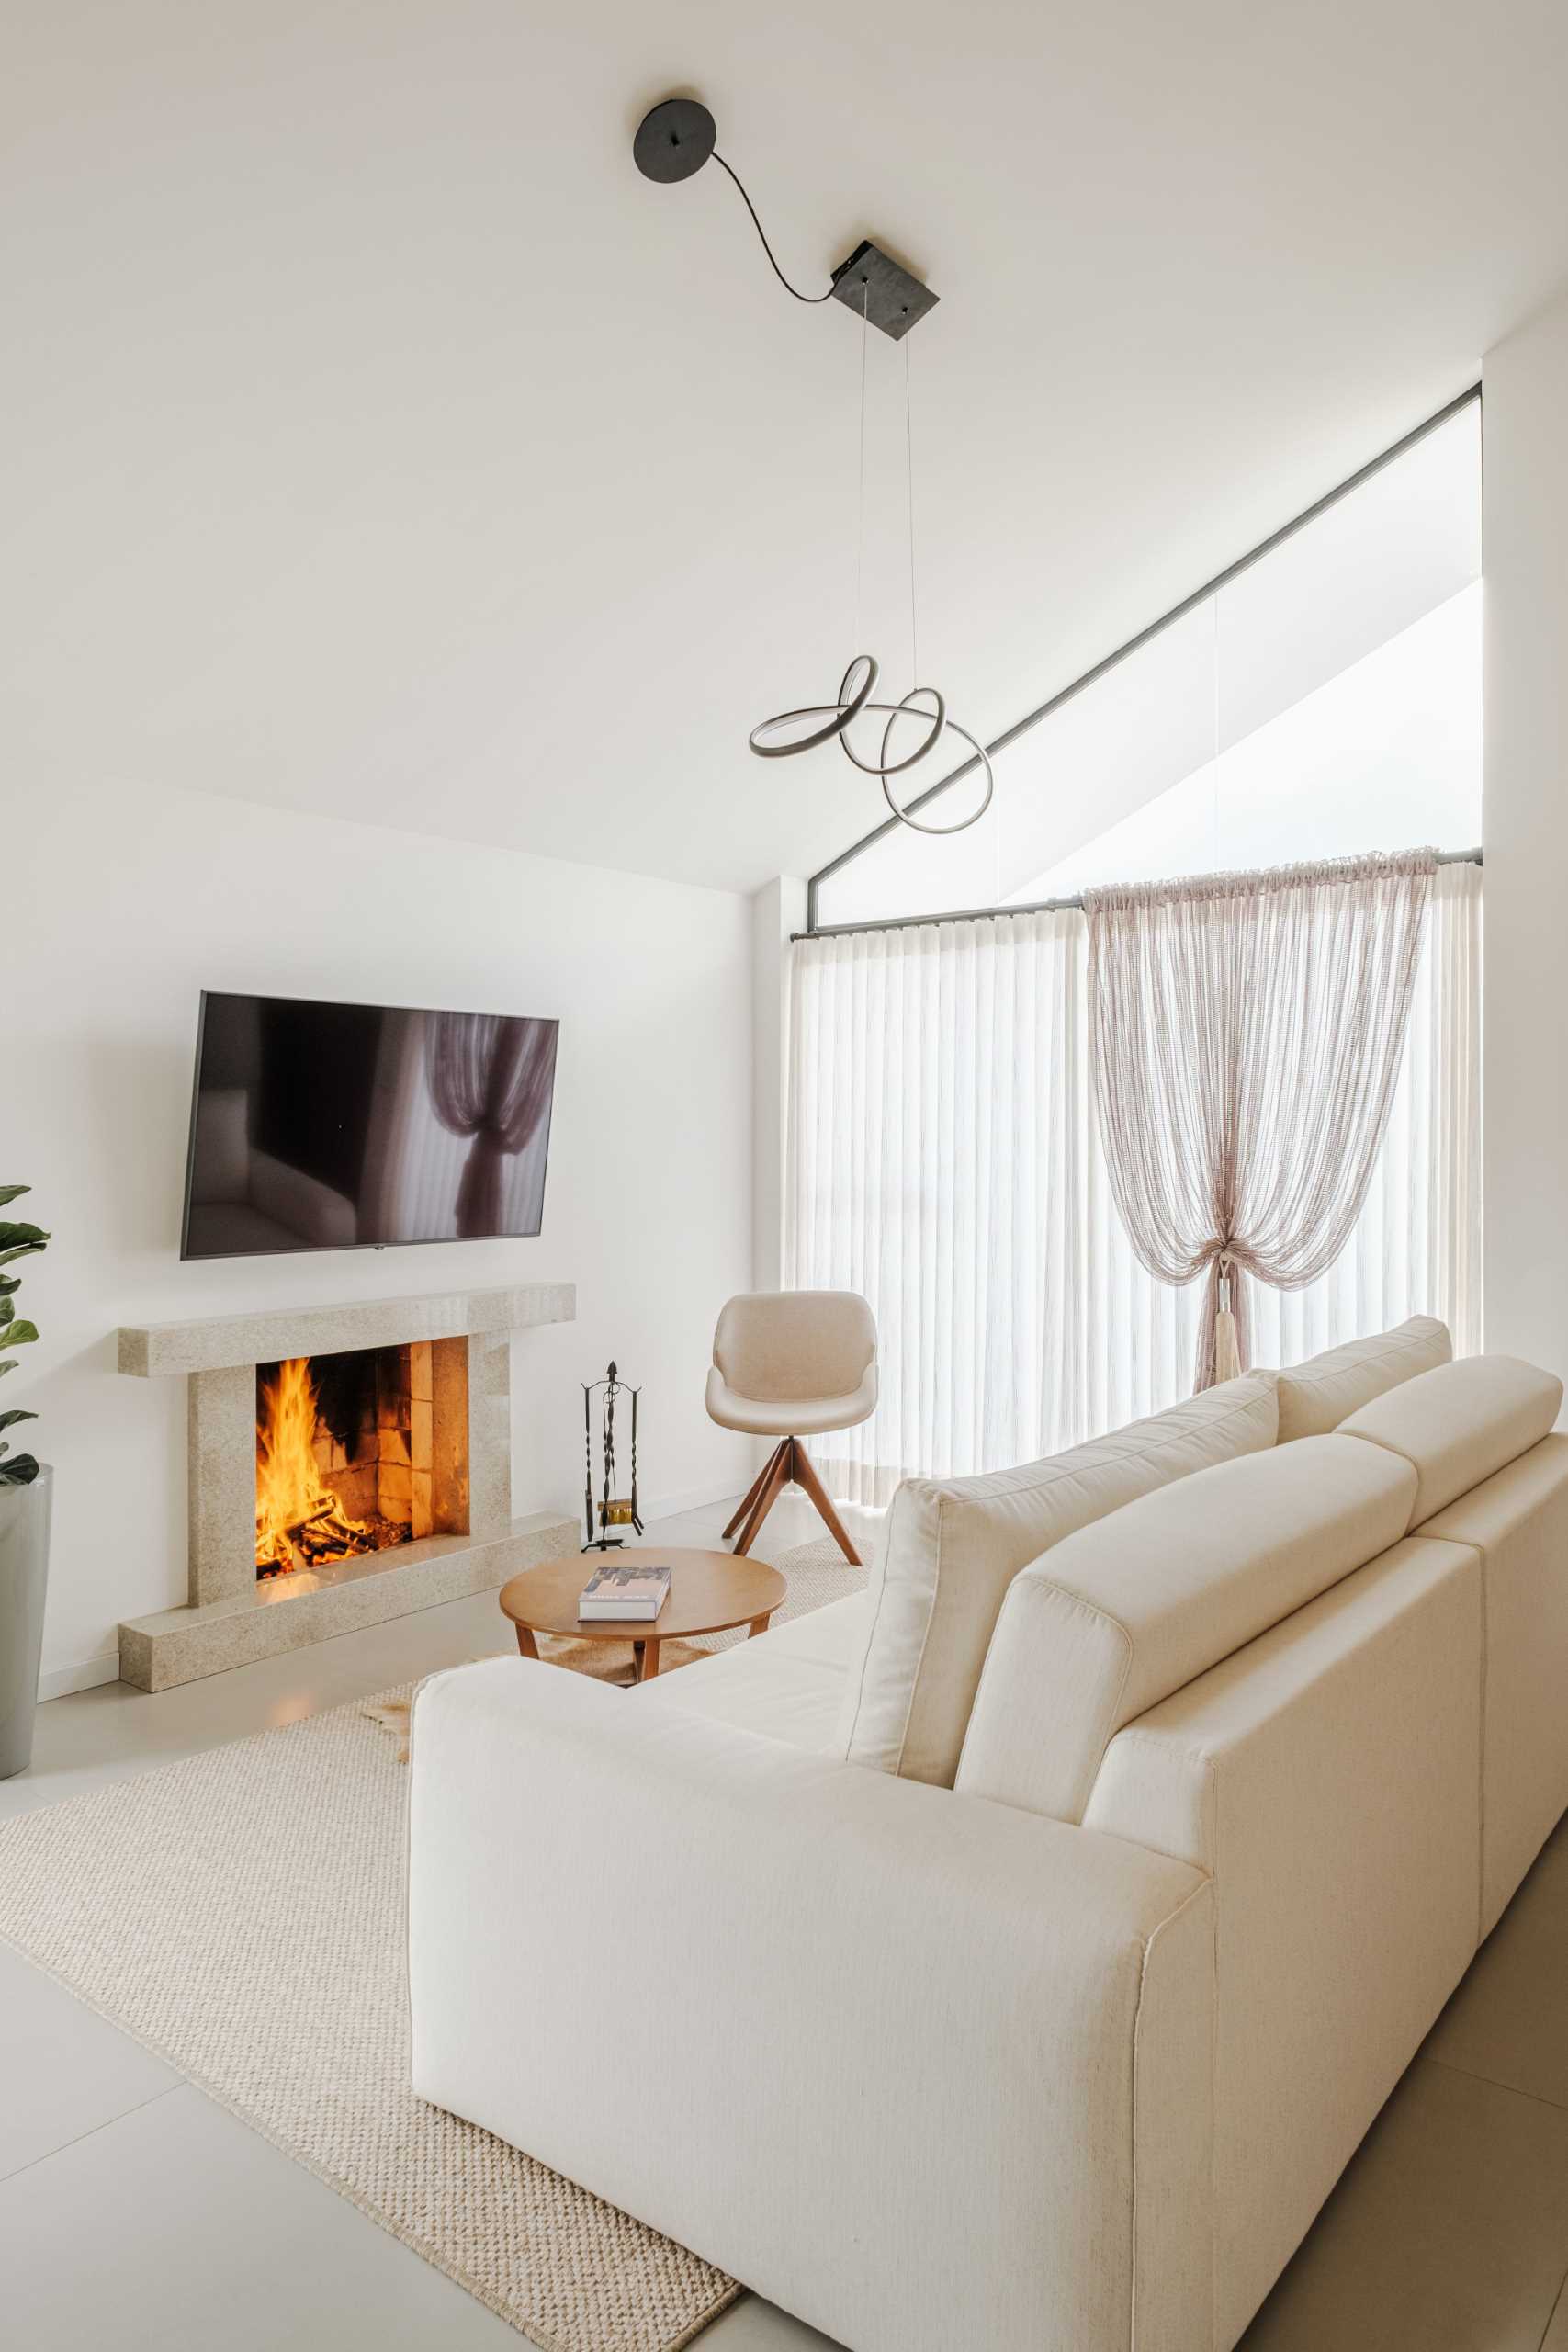 A modern living room with a wood burning fireplace.